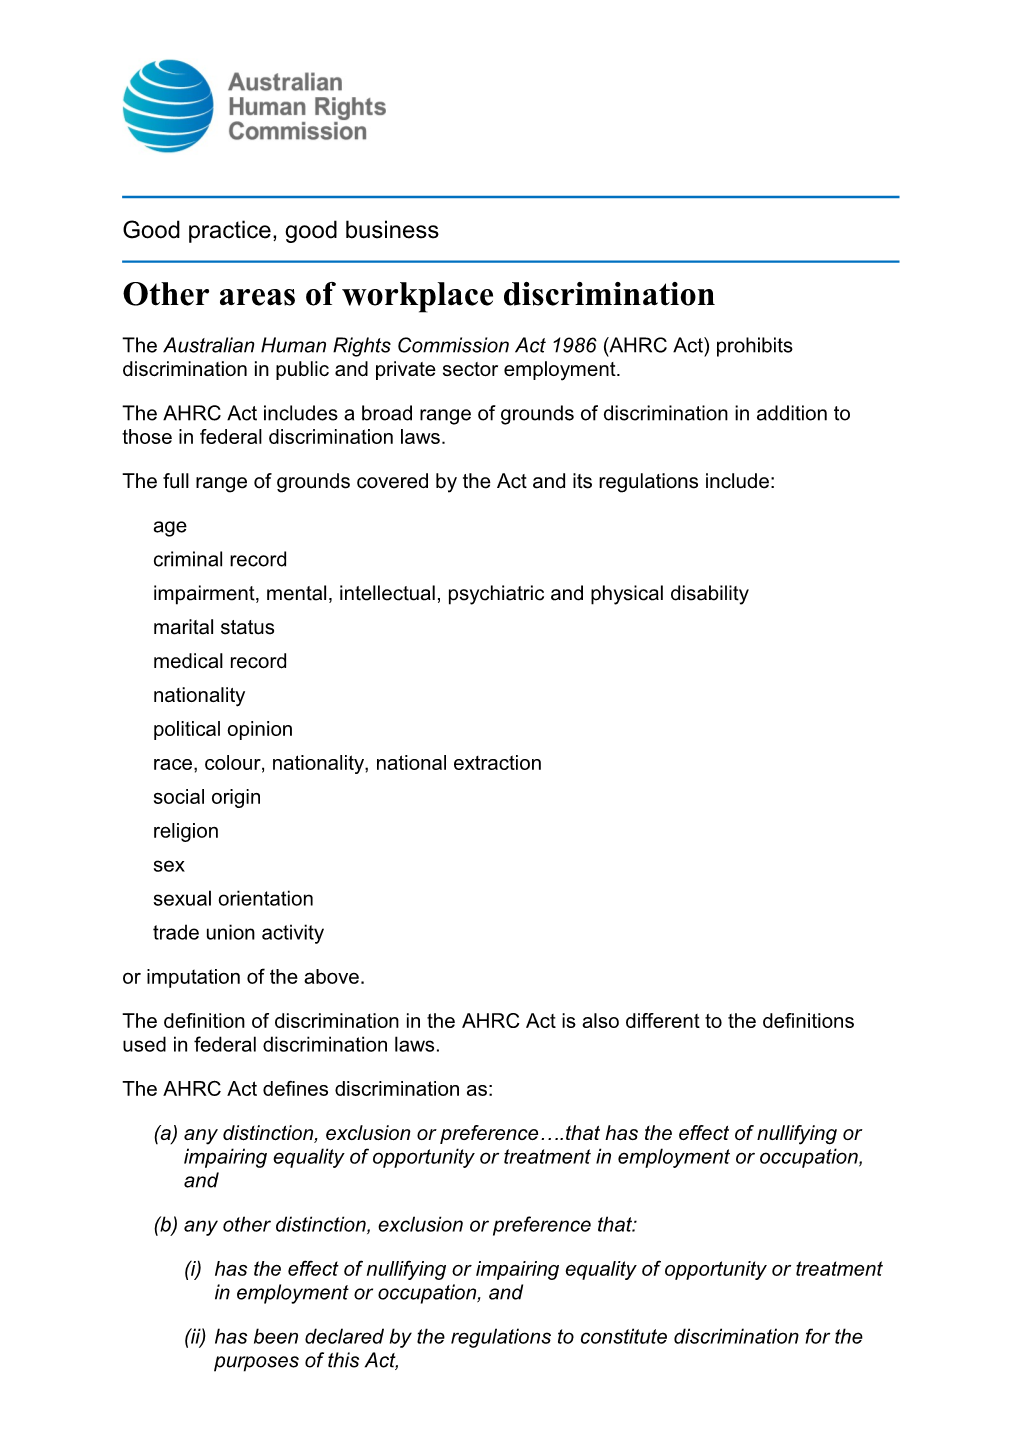 Other Areas of Workplace Discrimination